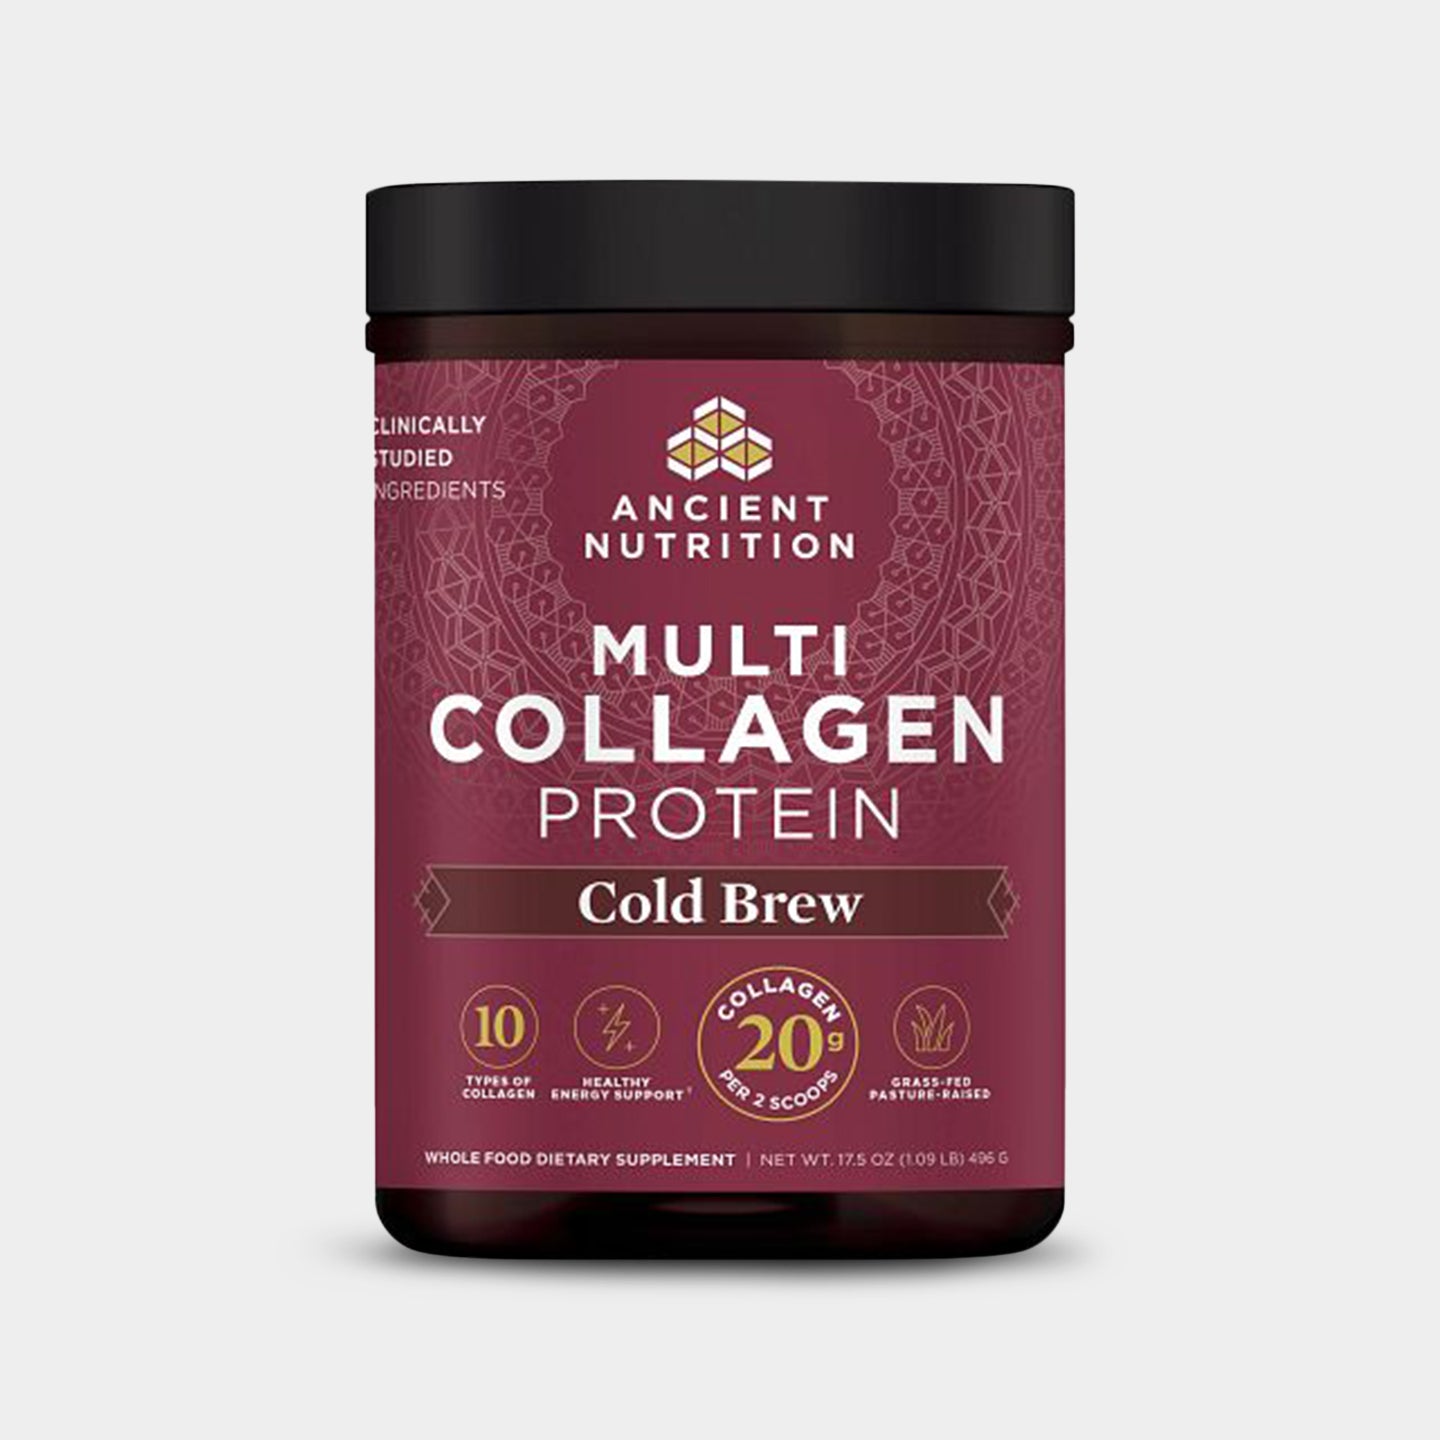 Ancient Nutrition Multi Collagen Protein - 20g, Cold Brew, 40 Servings A1